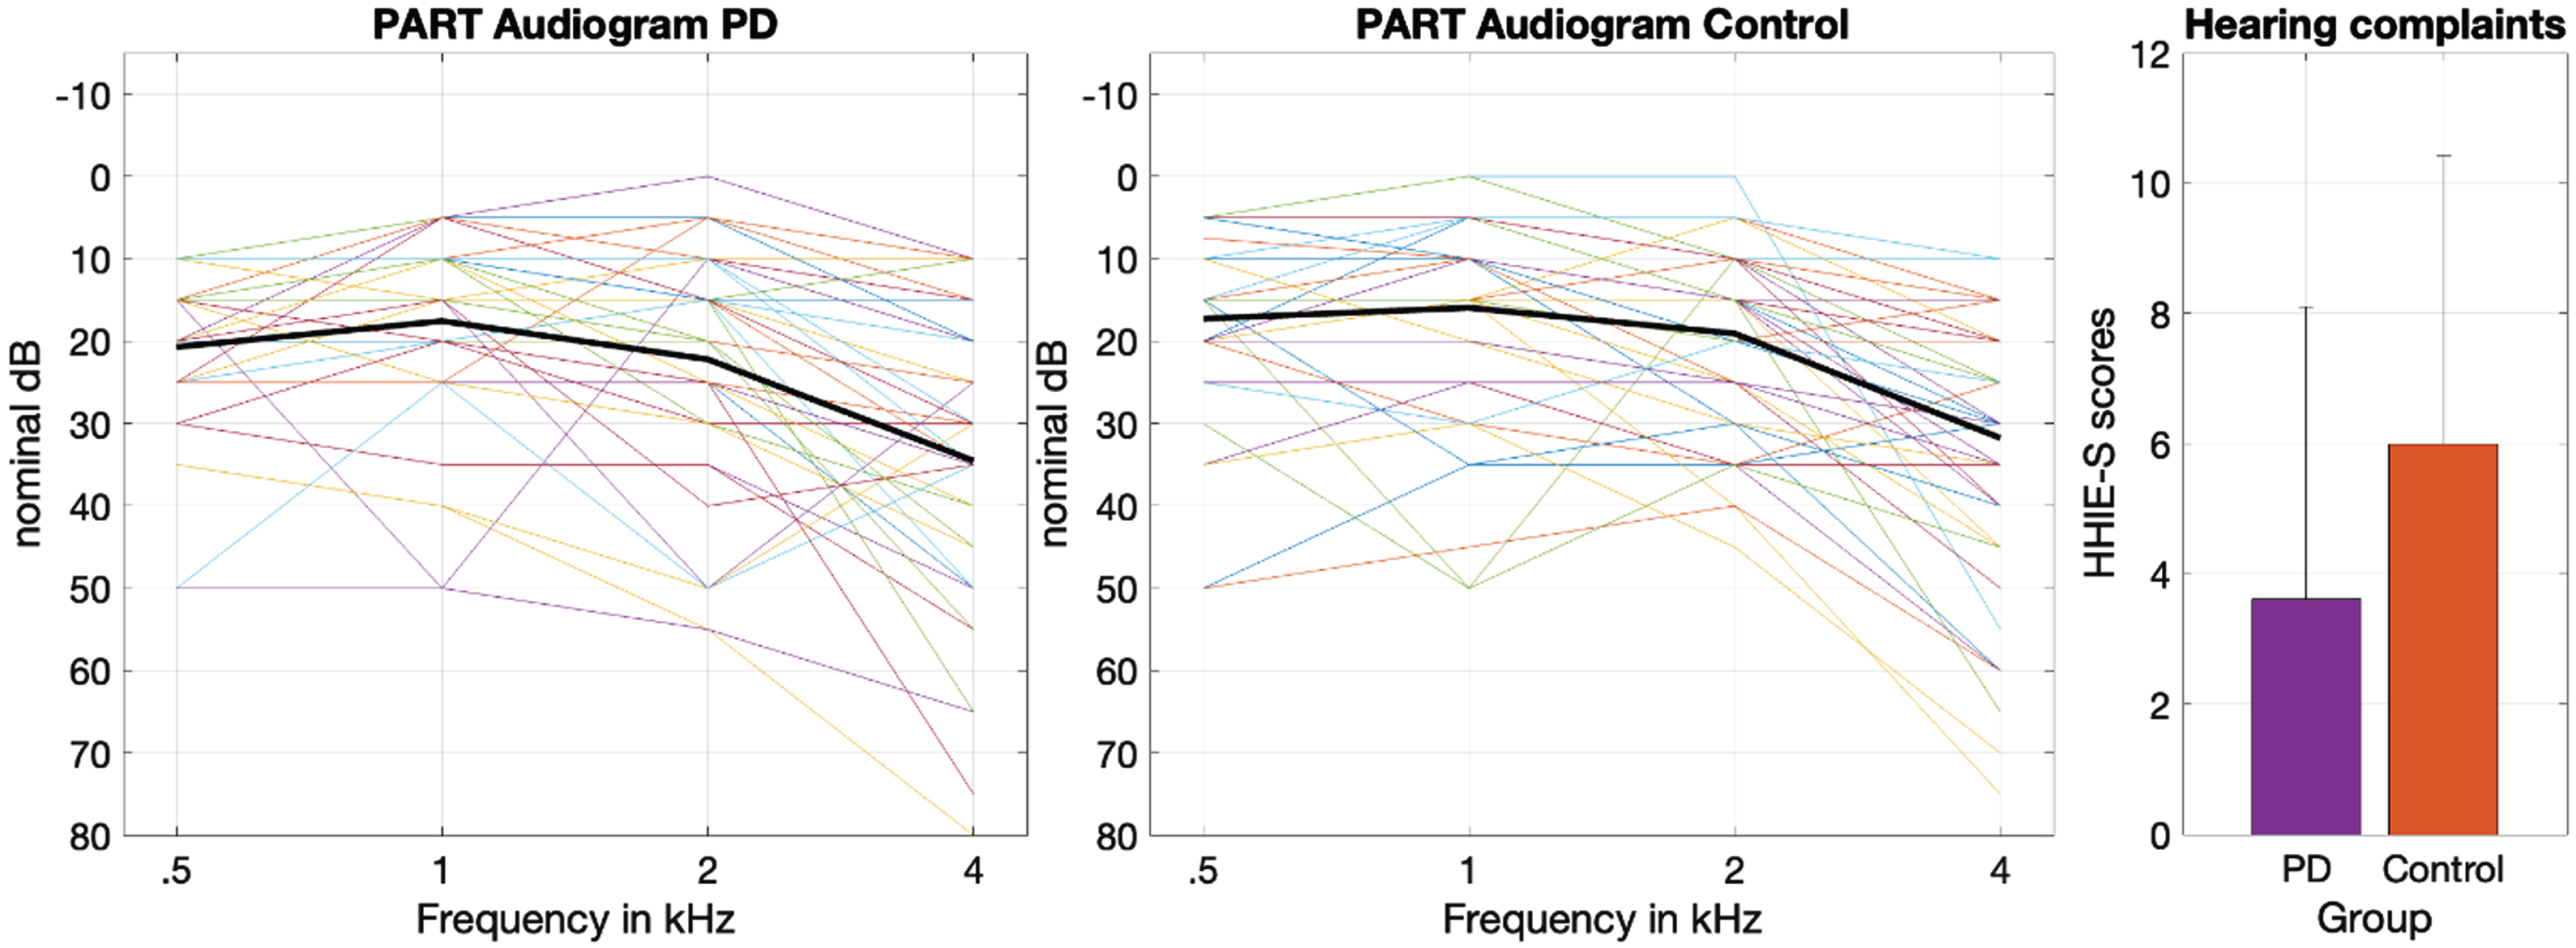 Left and middle panels show pure tone detection thresholds across the four frequencies tested in each group. The solid black line represents the mean detection threshold. The right panel shows the mean self-reported hearing loss in each group. The error bars represent the standard deviation.